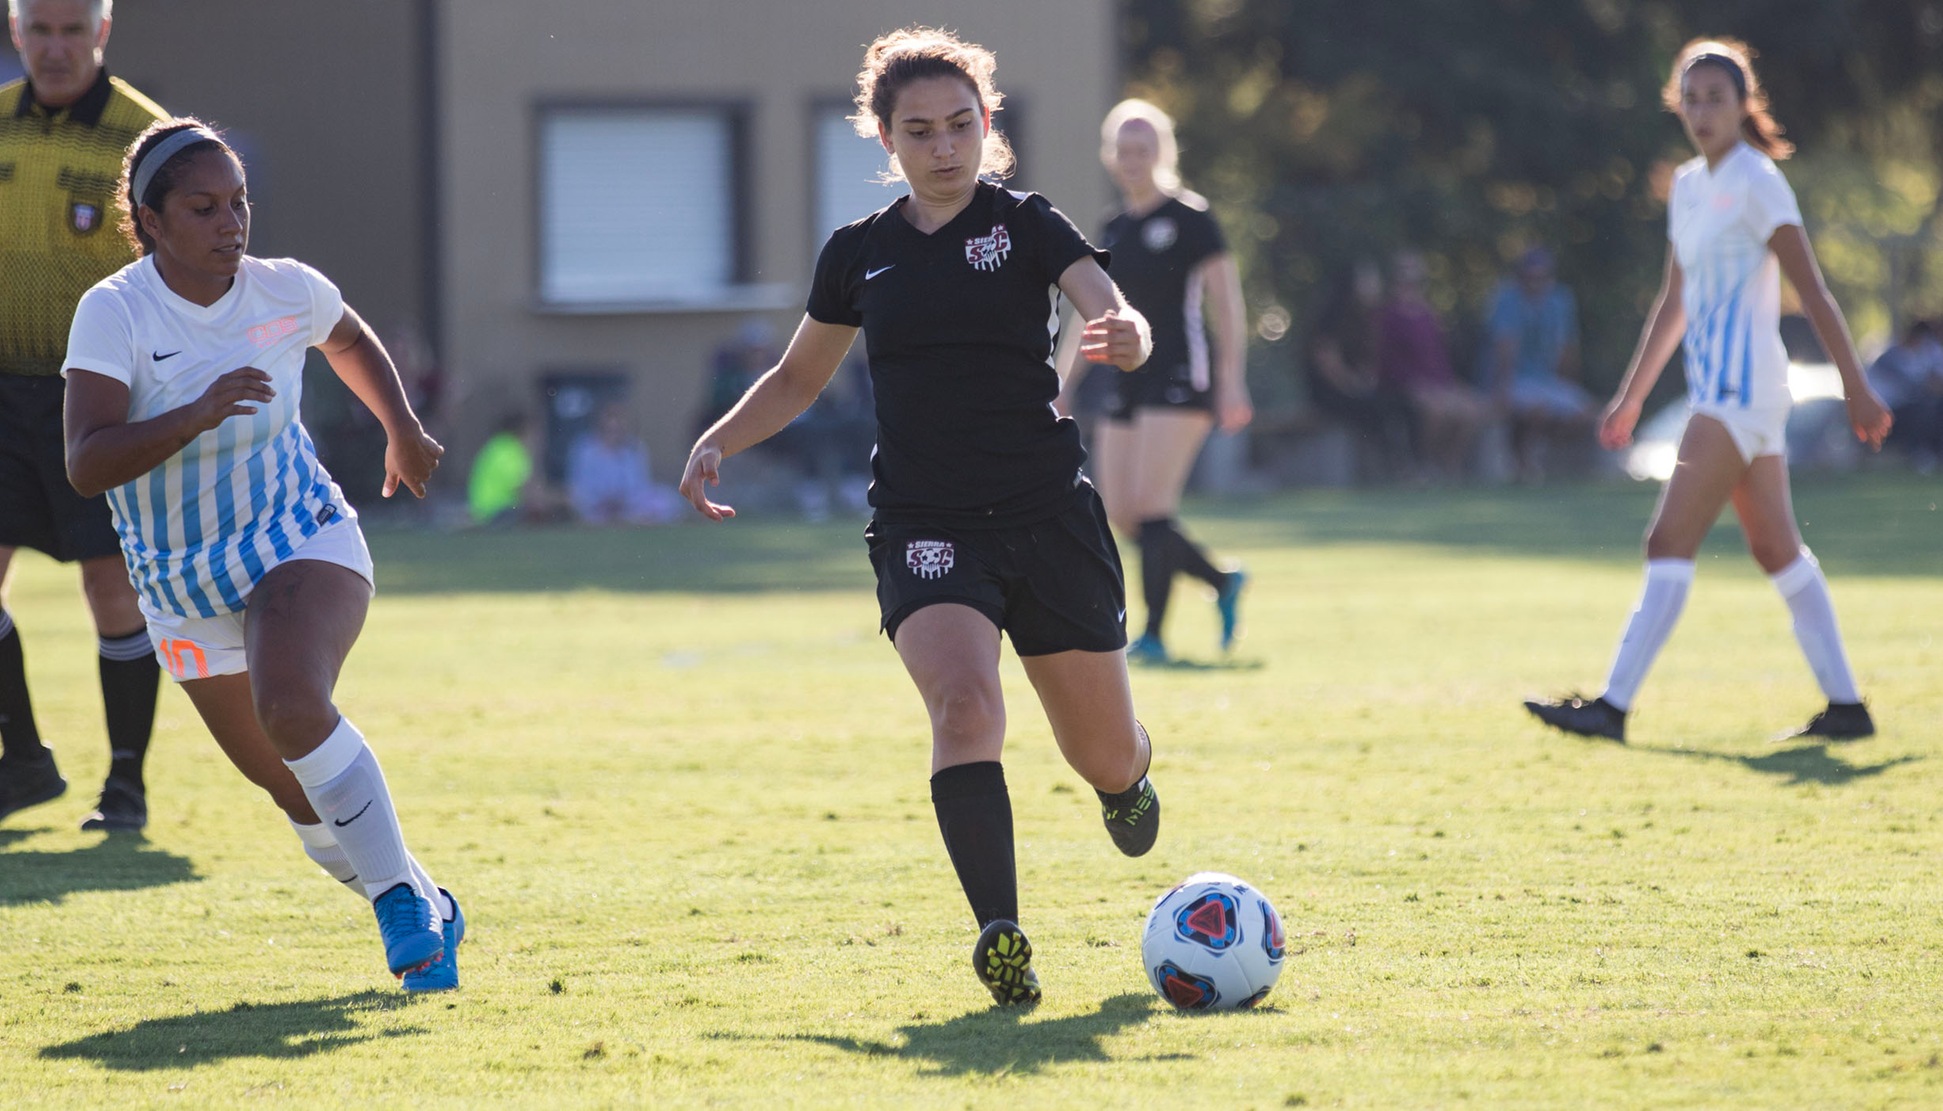 Sophomore Forward Christina Kanellou (08) scored one of the 12 goals in Sierra's 12-0 defeat of College of the Sequoias on Tuesday, August 28, 2018.